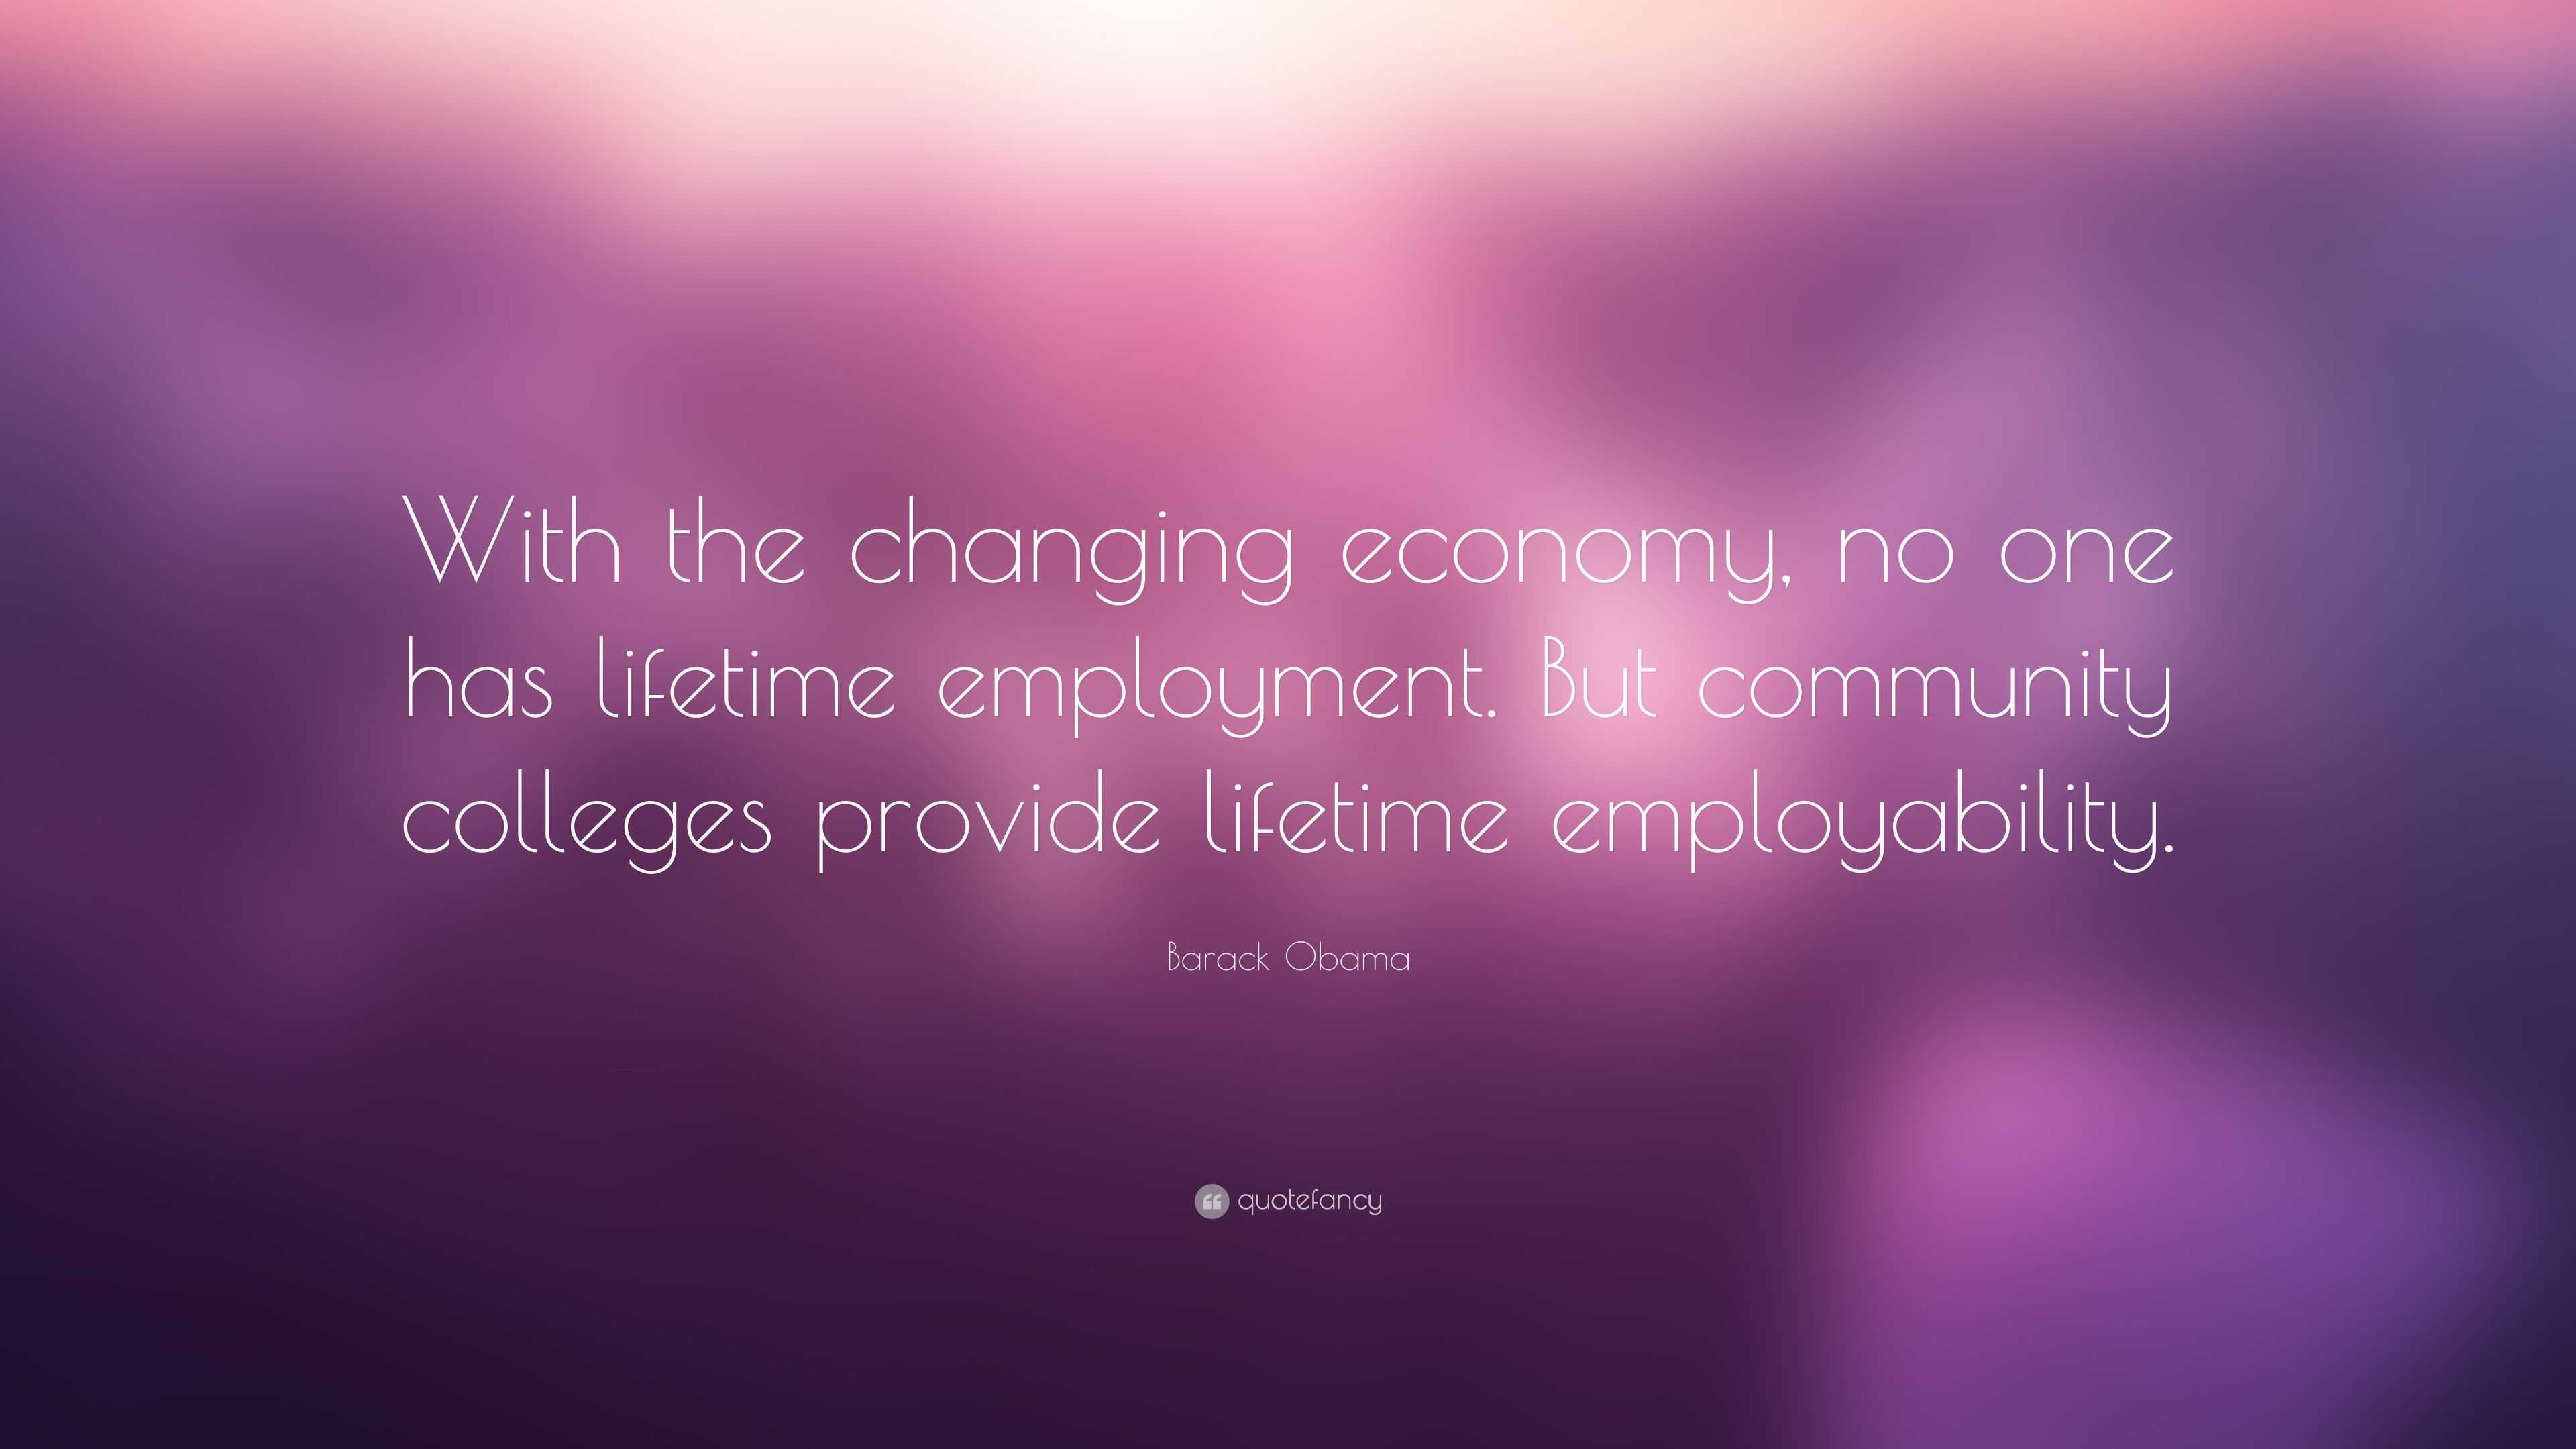 Barack Obama Quote: “With the changing economy, no one has lifetime